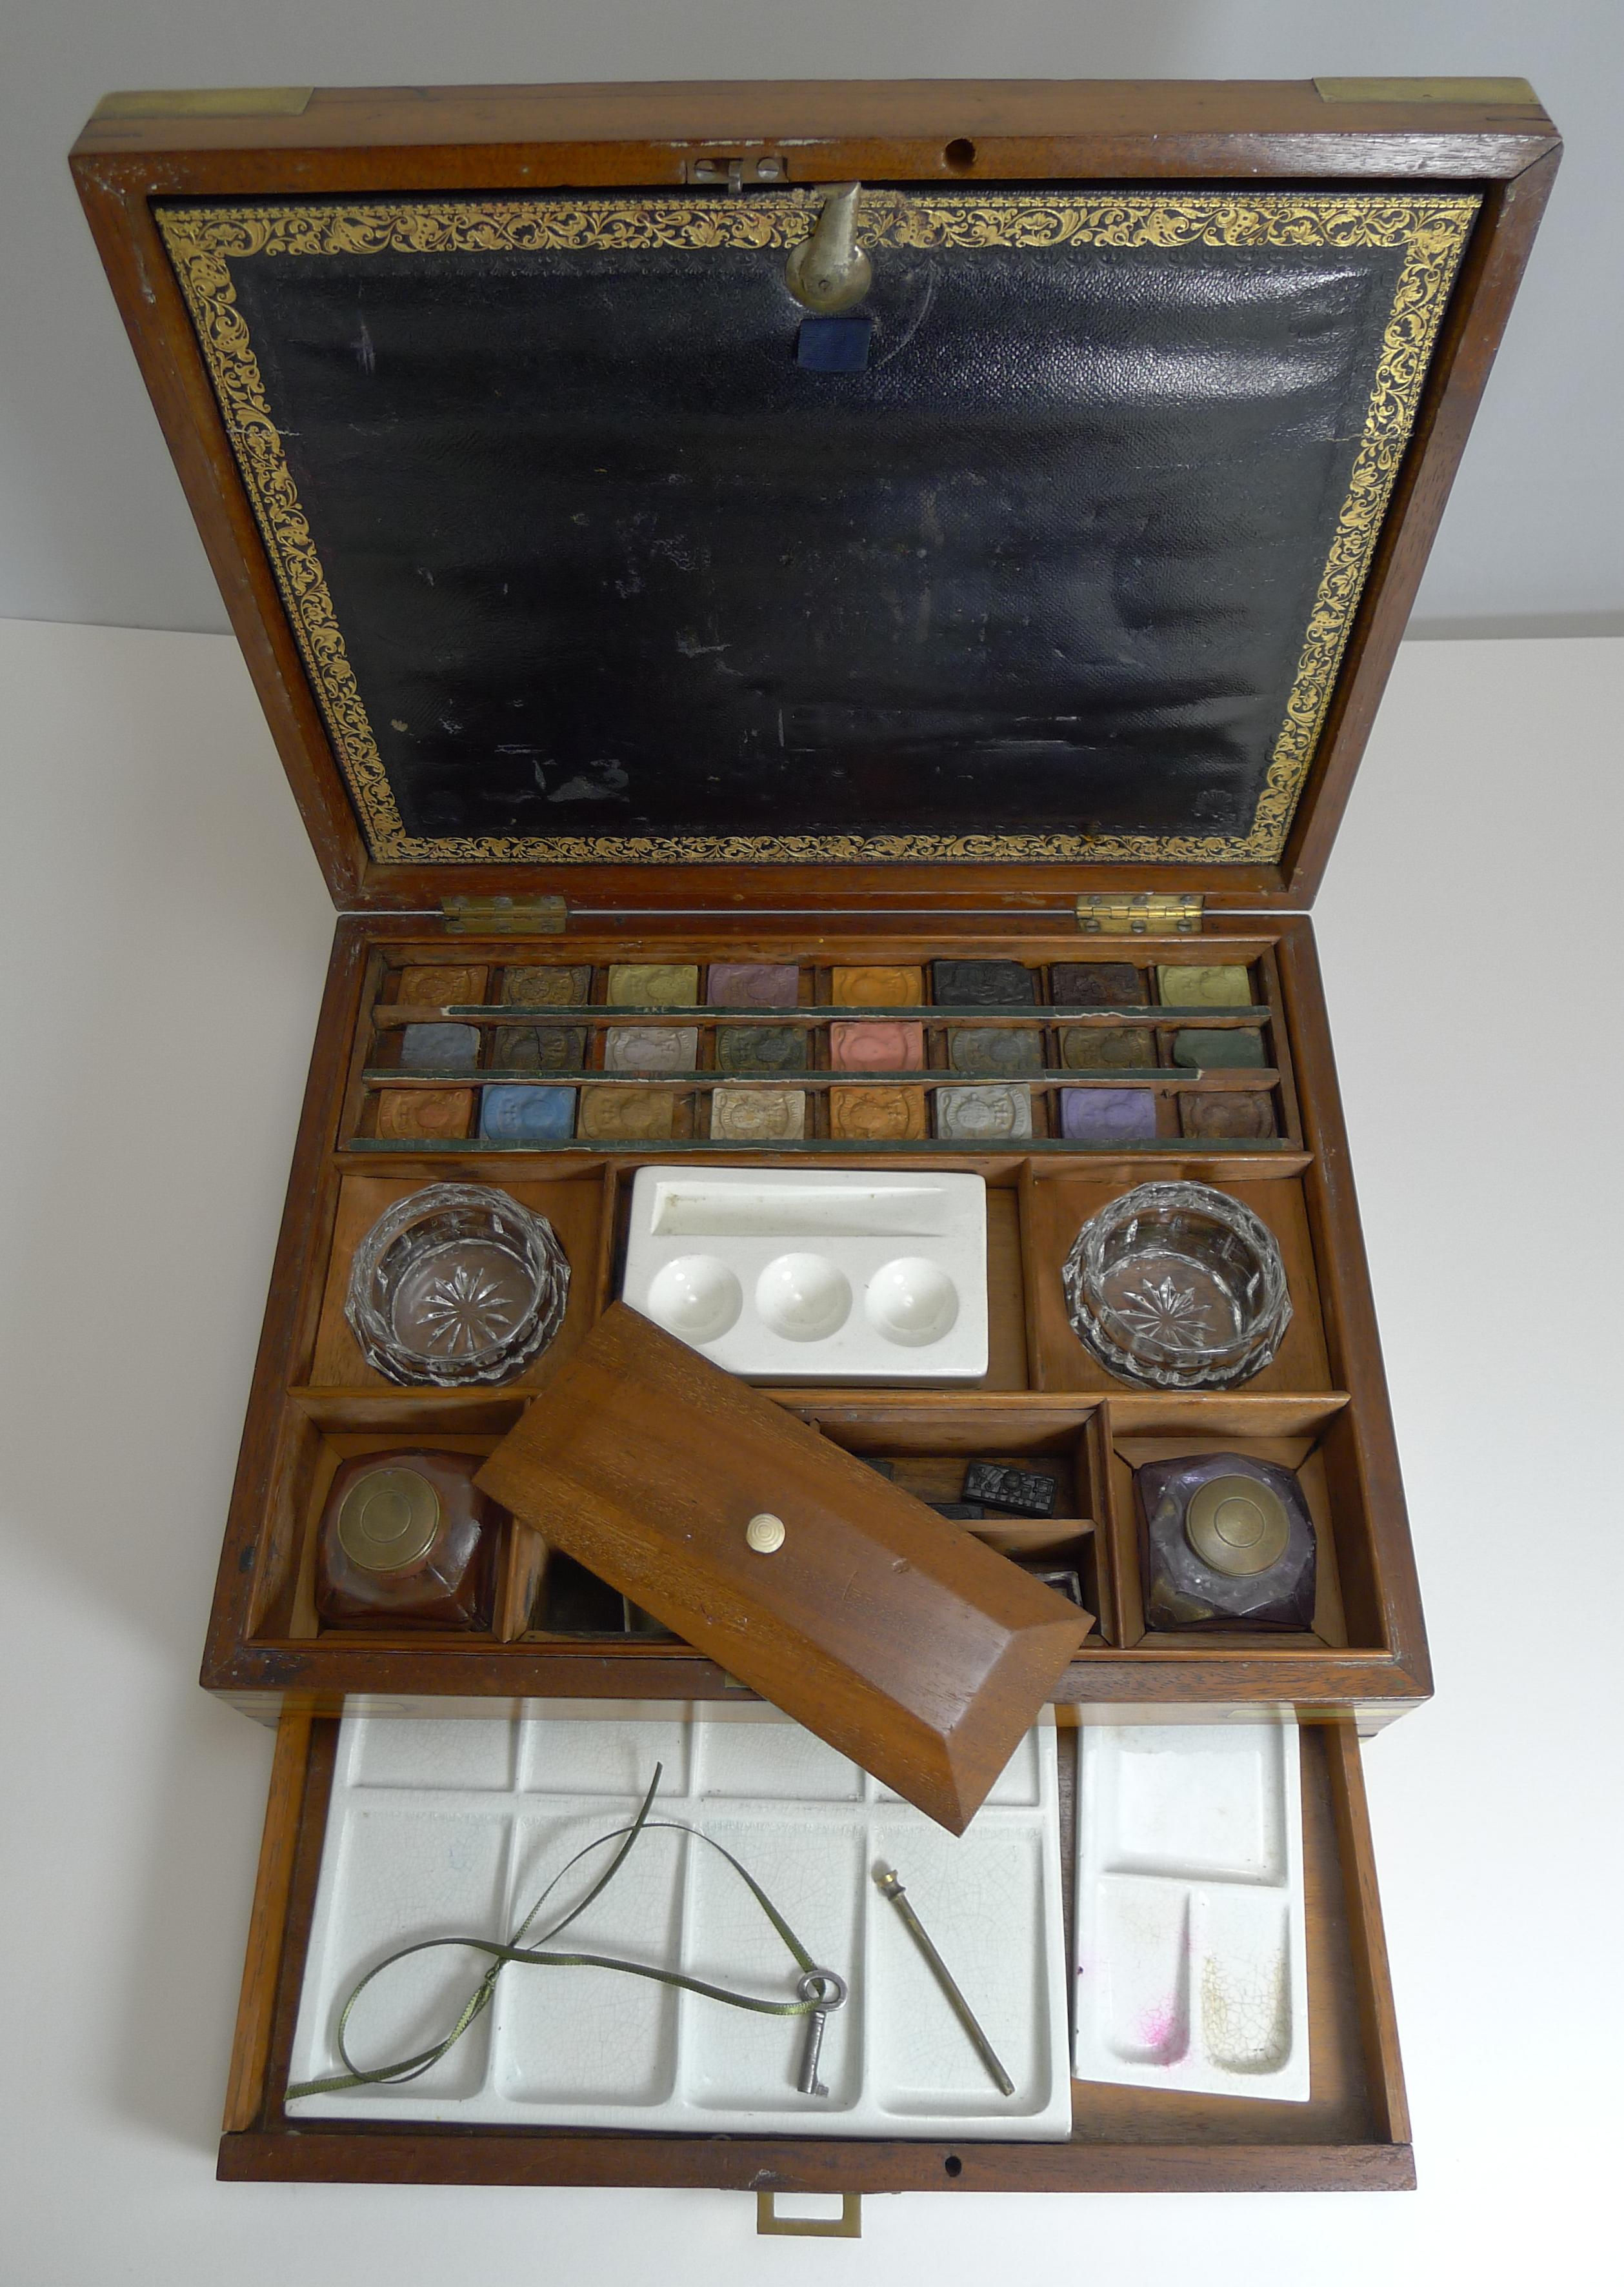 A fabulous Victorian artist / paint / watercolor box dating to circa 1860 by the famous Reeves & Sons of 113 Cheapside, London.

The box is made from mahogany, brass bound in a military / Campaign style with a flush inlaid brass handle to the